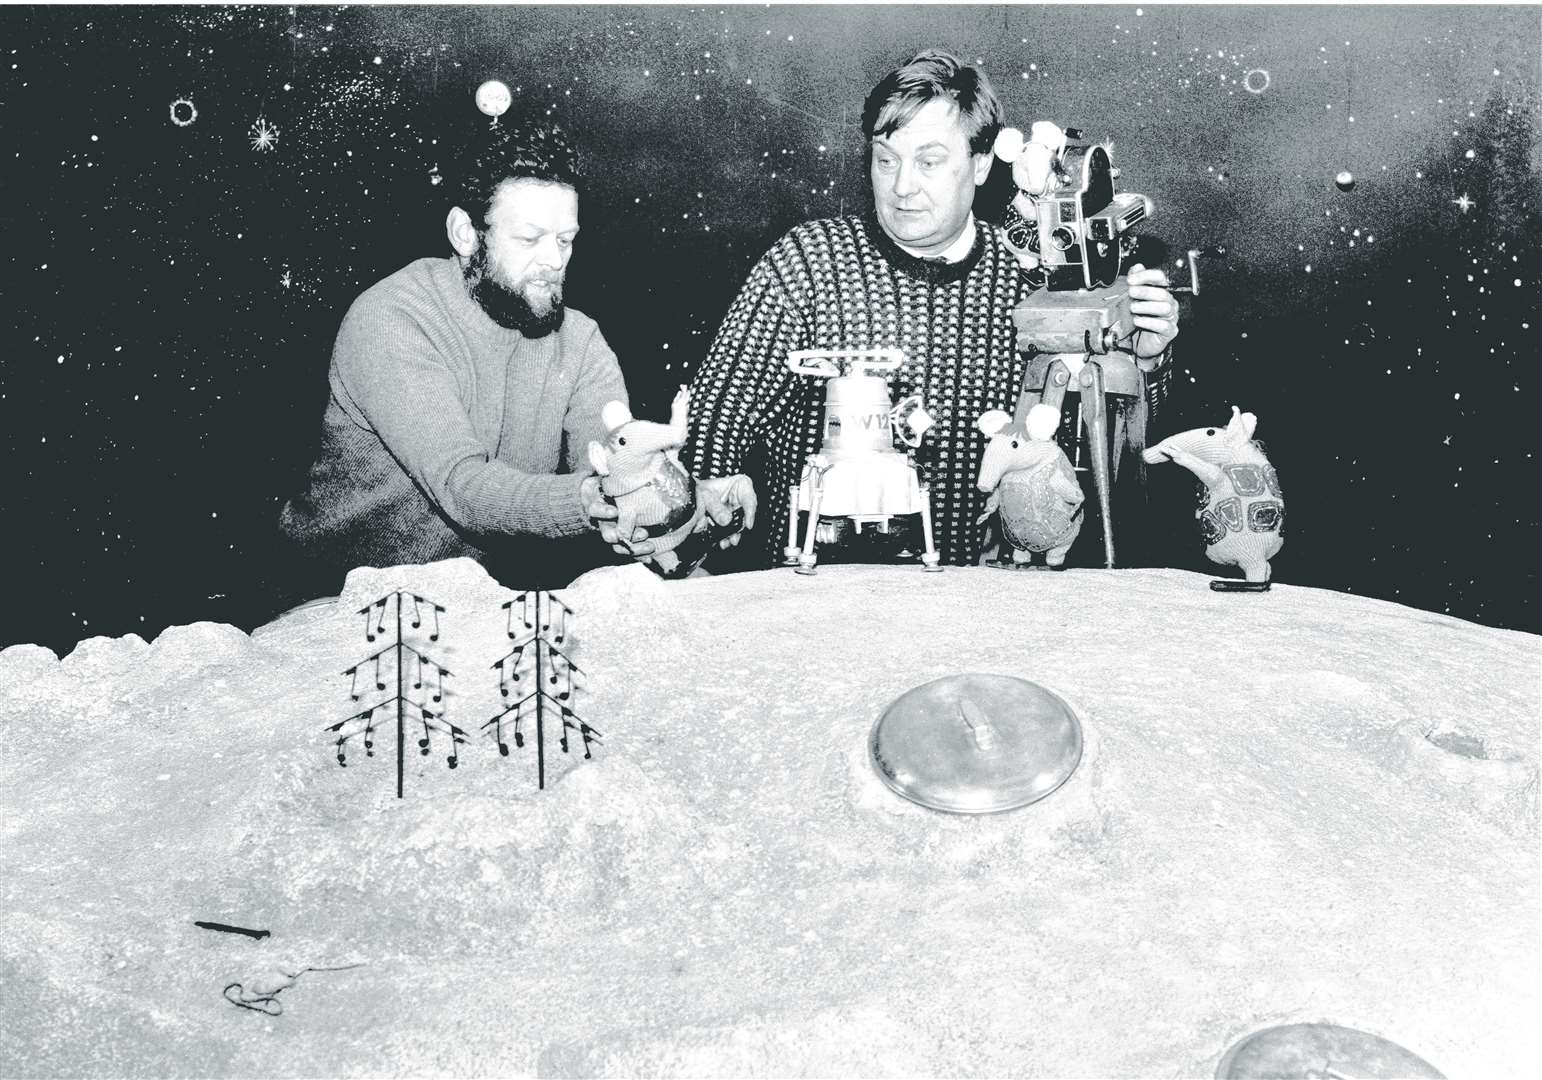 Peter Firmin (left) and Oliver Postgate at work on the children's TV Programme The Clangers in their Blean studio back in the 60s